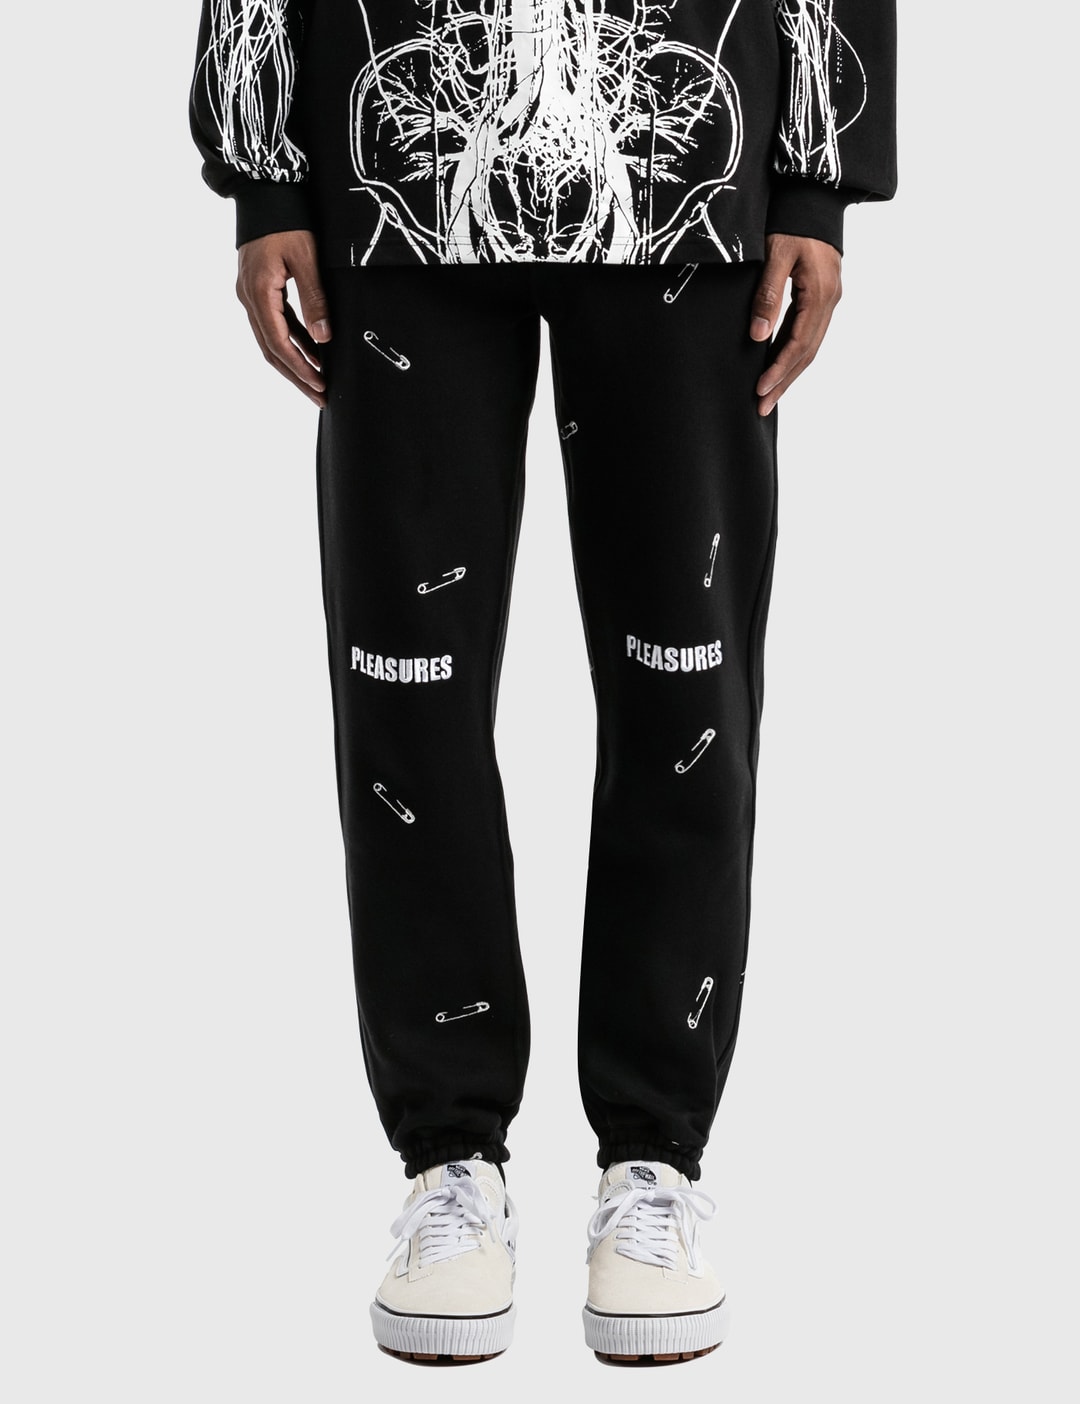 Pleasures - Safety Embroidered Sweat Pants | HBX - Globally Curated ...